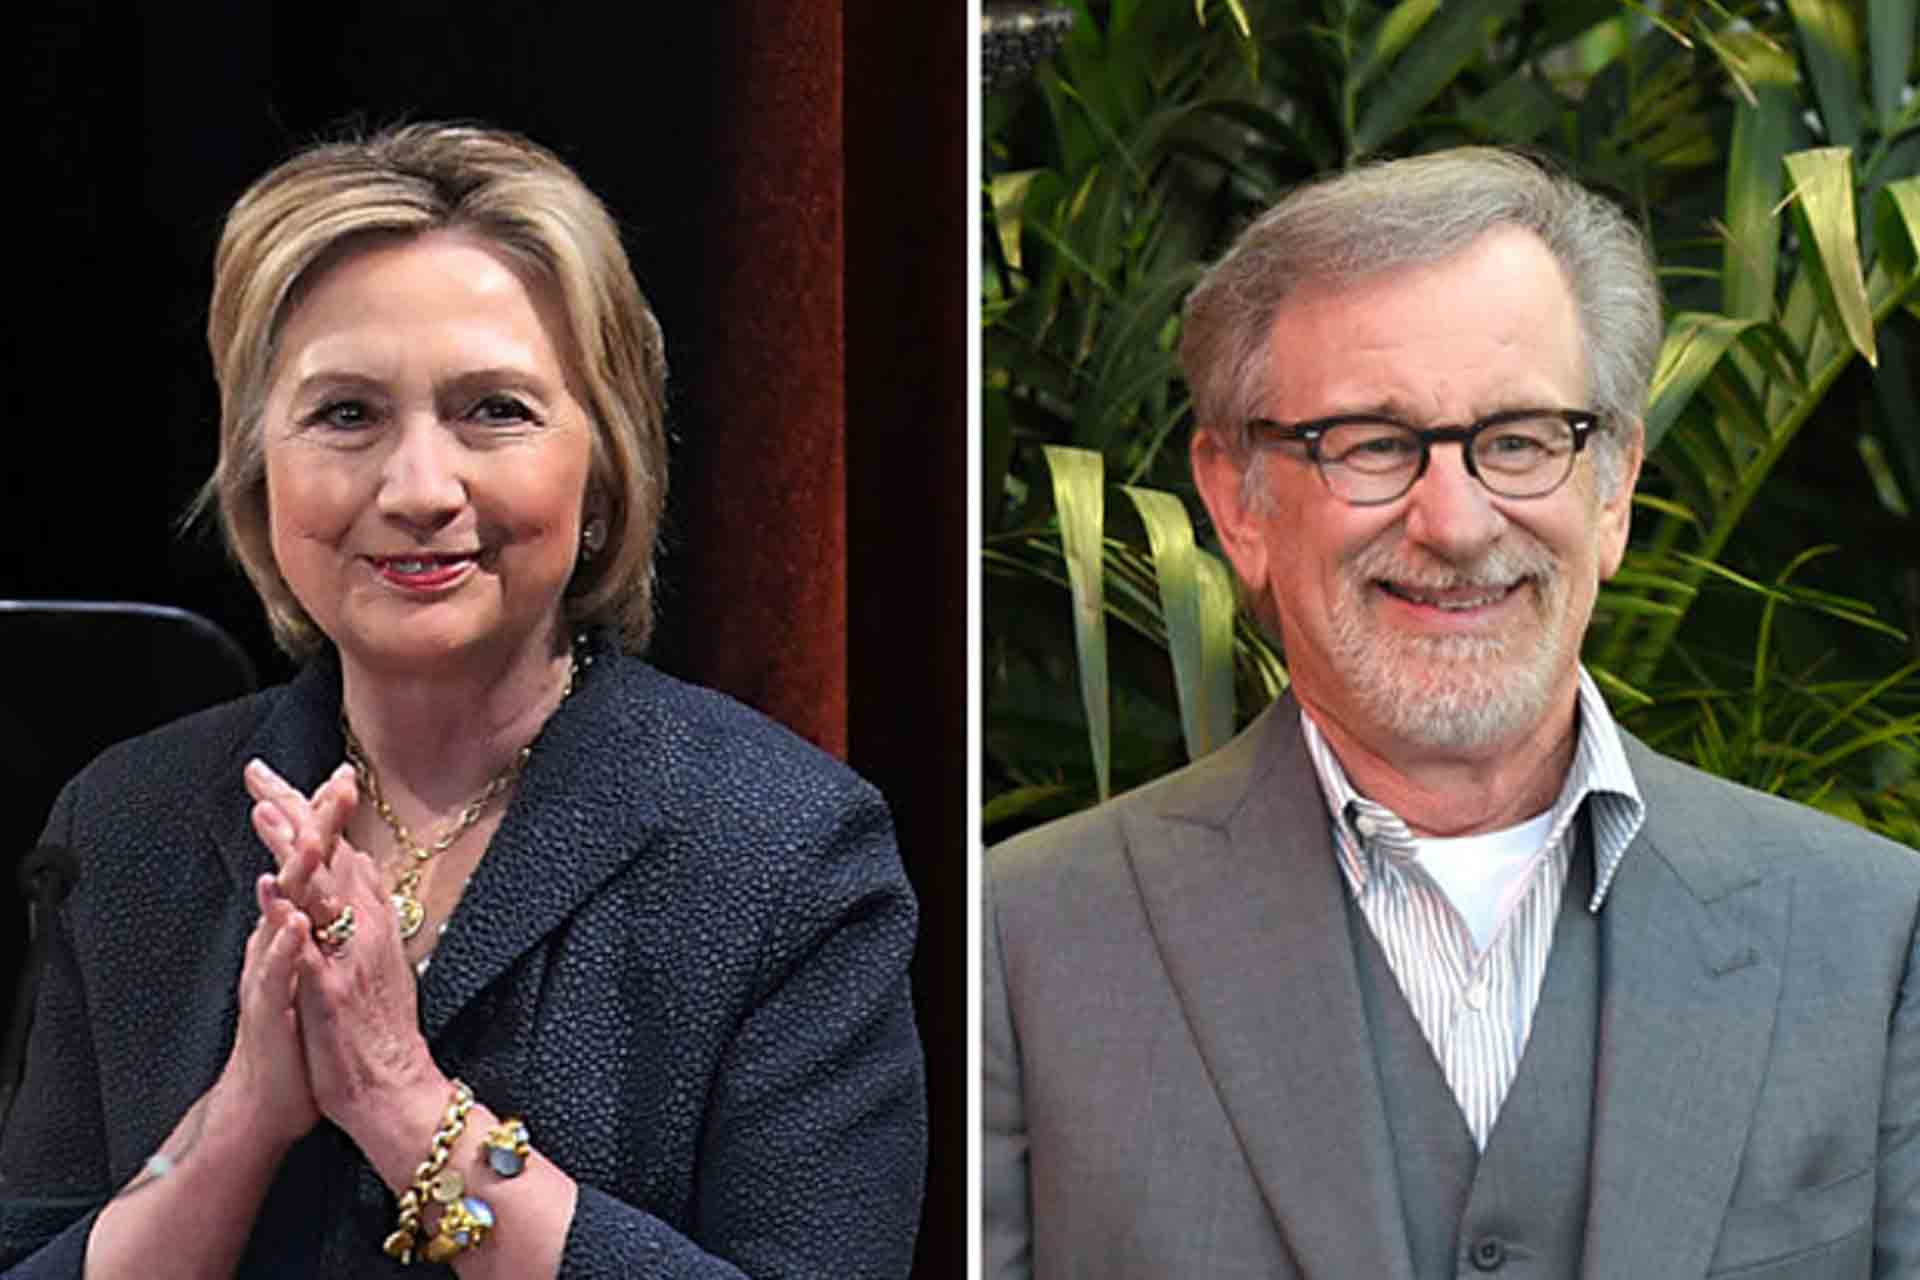 Hilary Clinton, Steven Spielberg Team Up To Adapt Elaine Weiss’s The Woman’s Hour